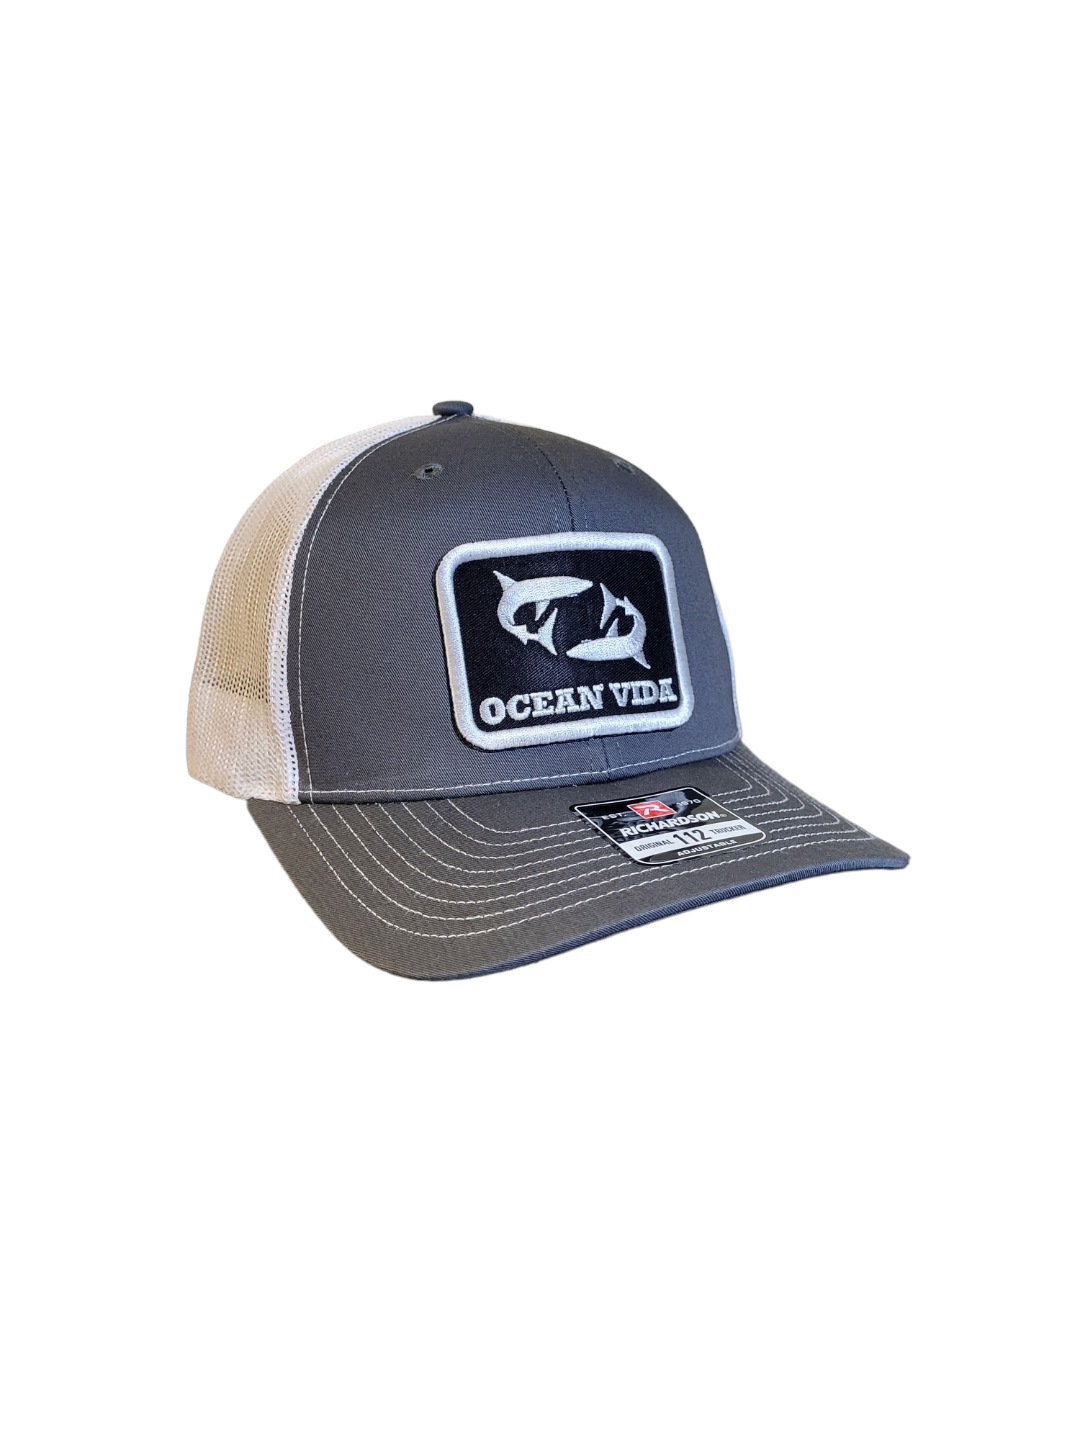 Charcoal Outdoor Cap with Black Patch